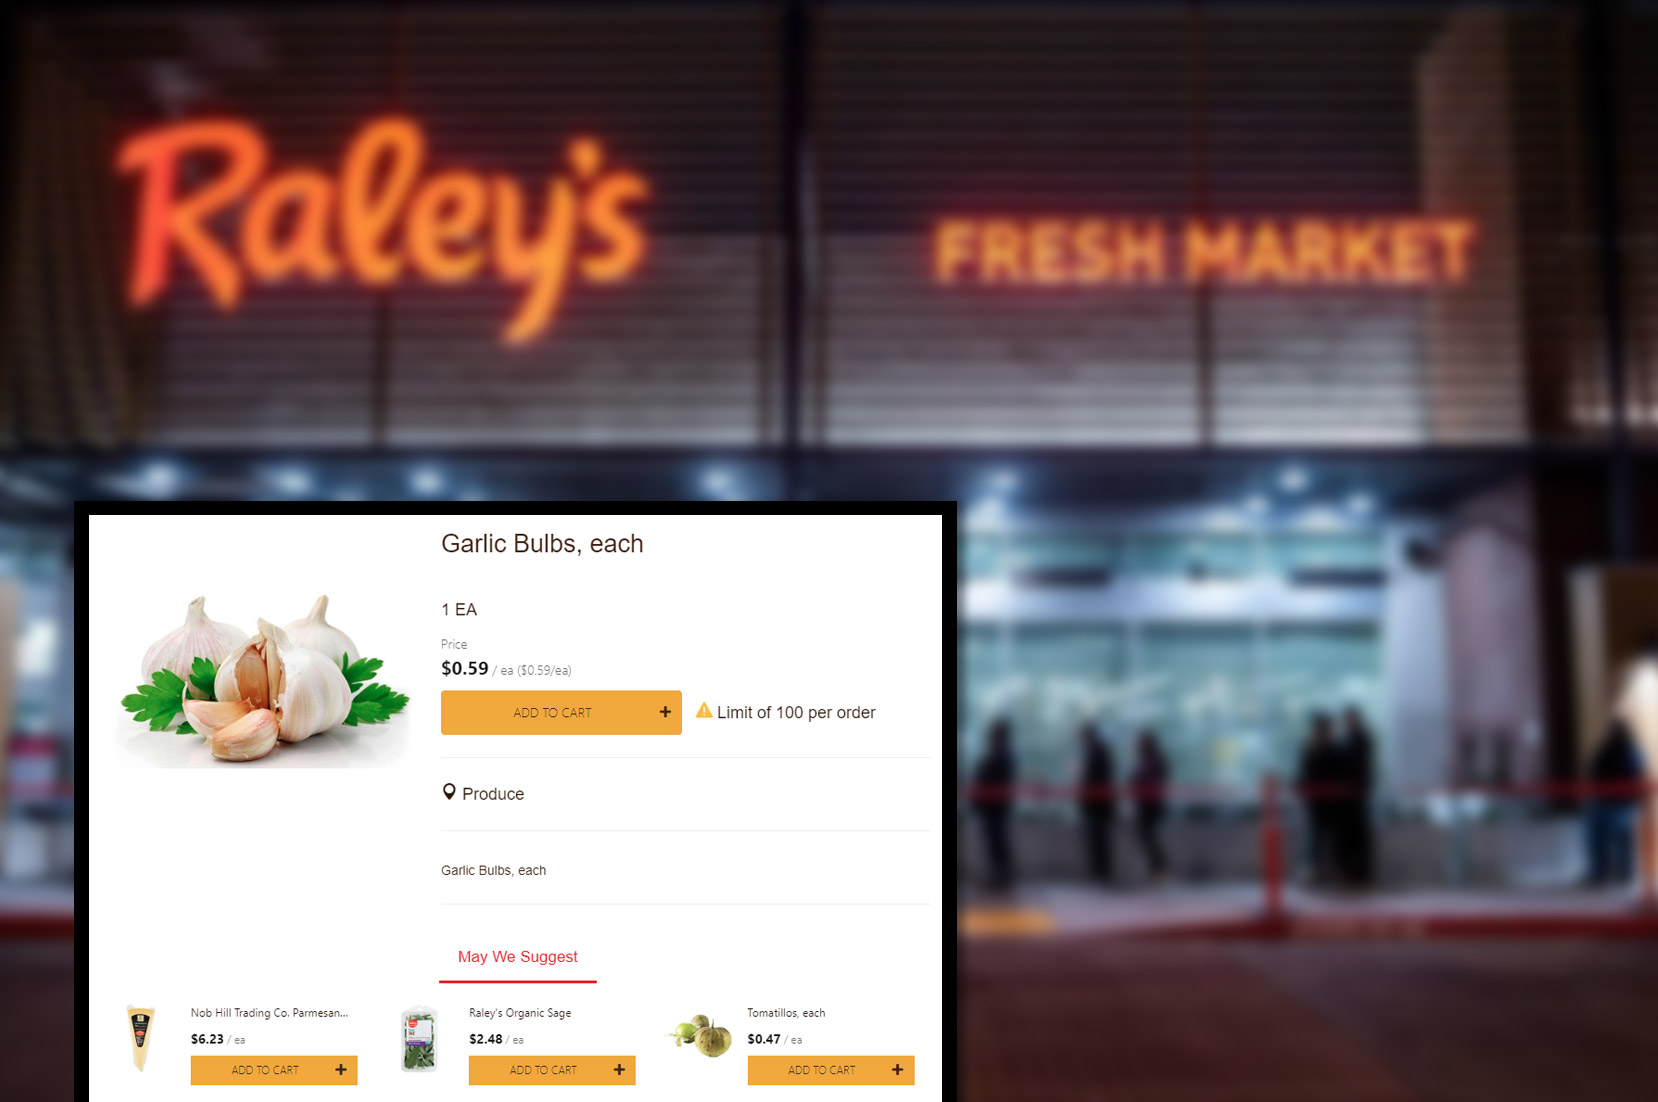 raleys-comproduct-pricing-information-and-image-scraping-services